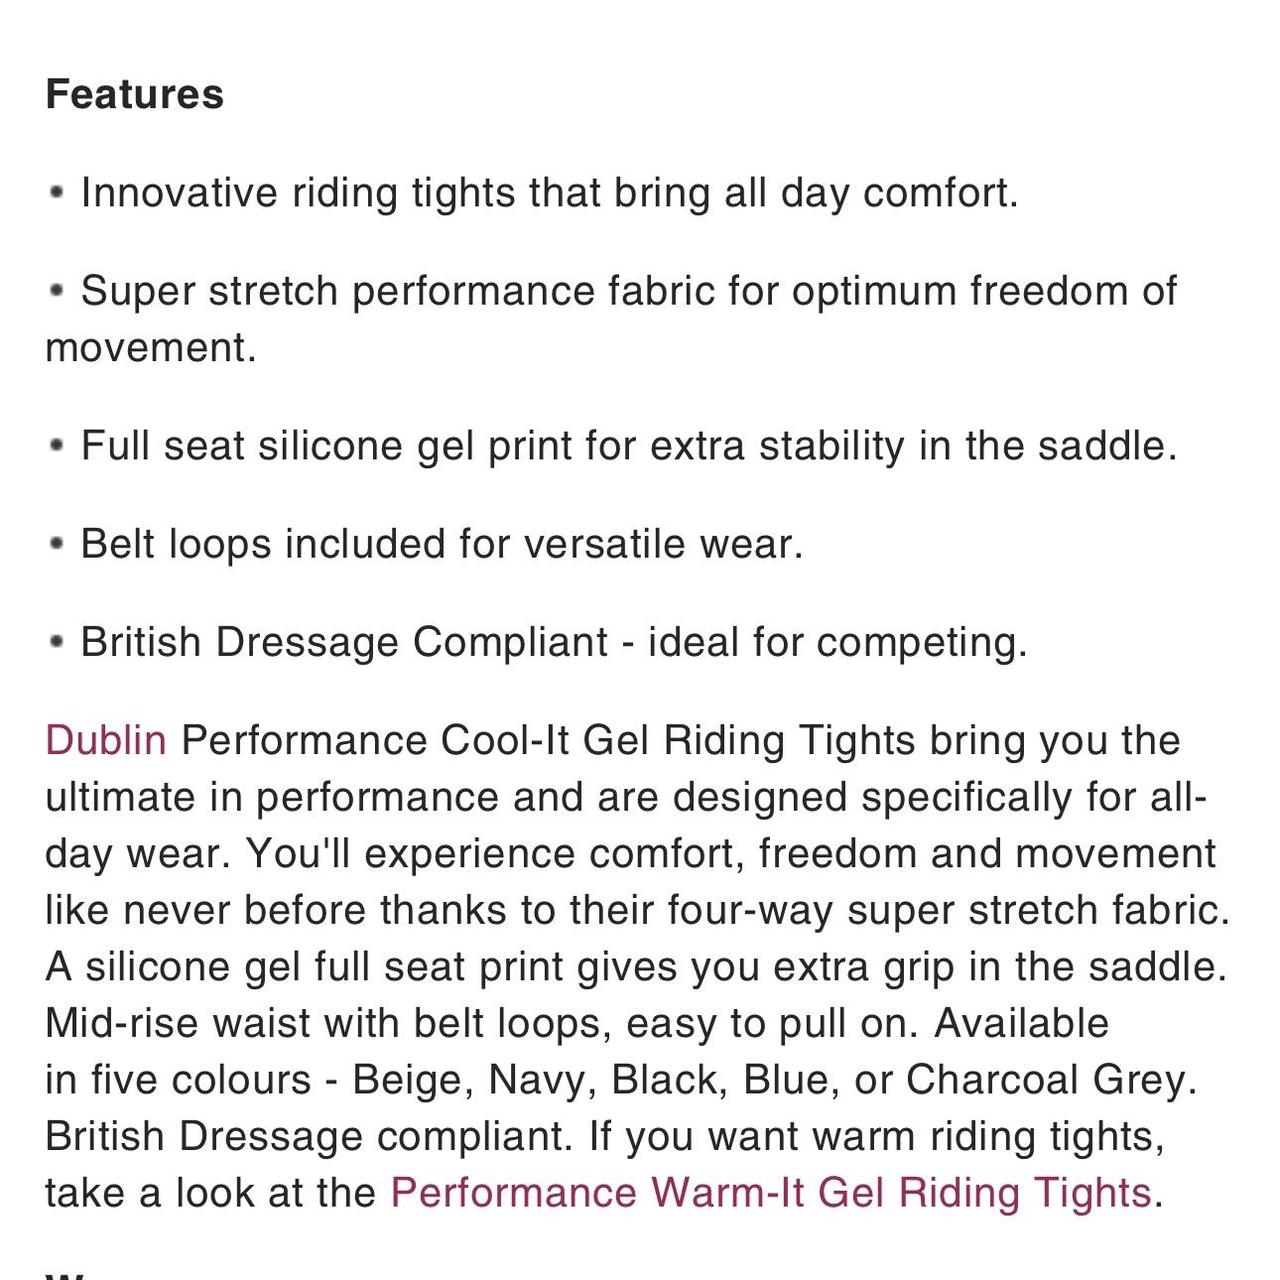 Dublin Performance Cool-It Gel Riding Tights With Silicone Full